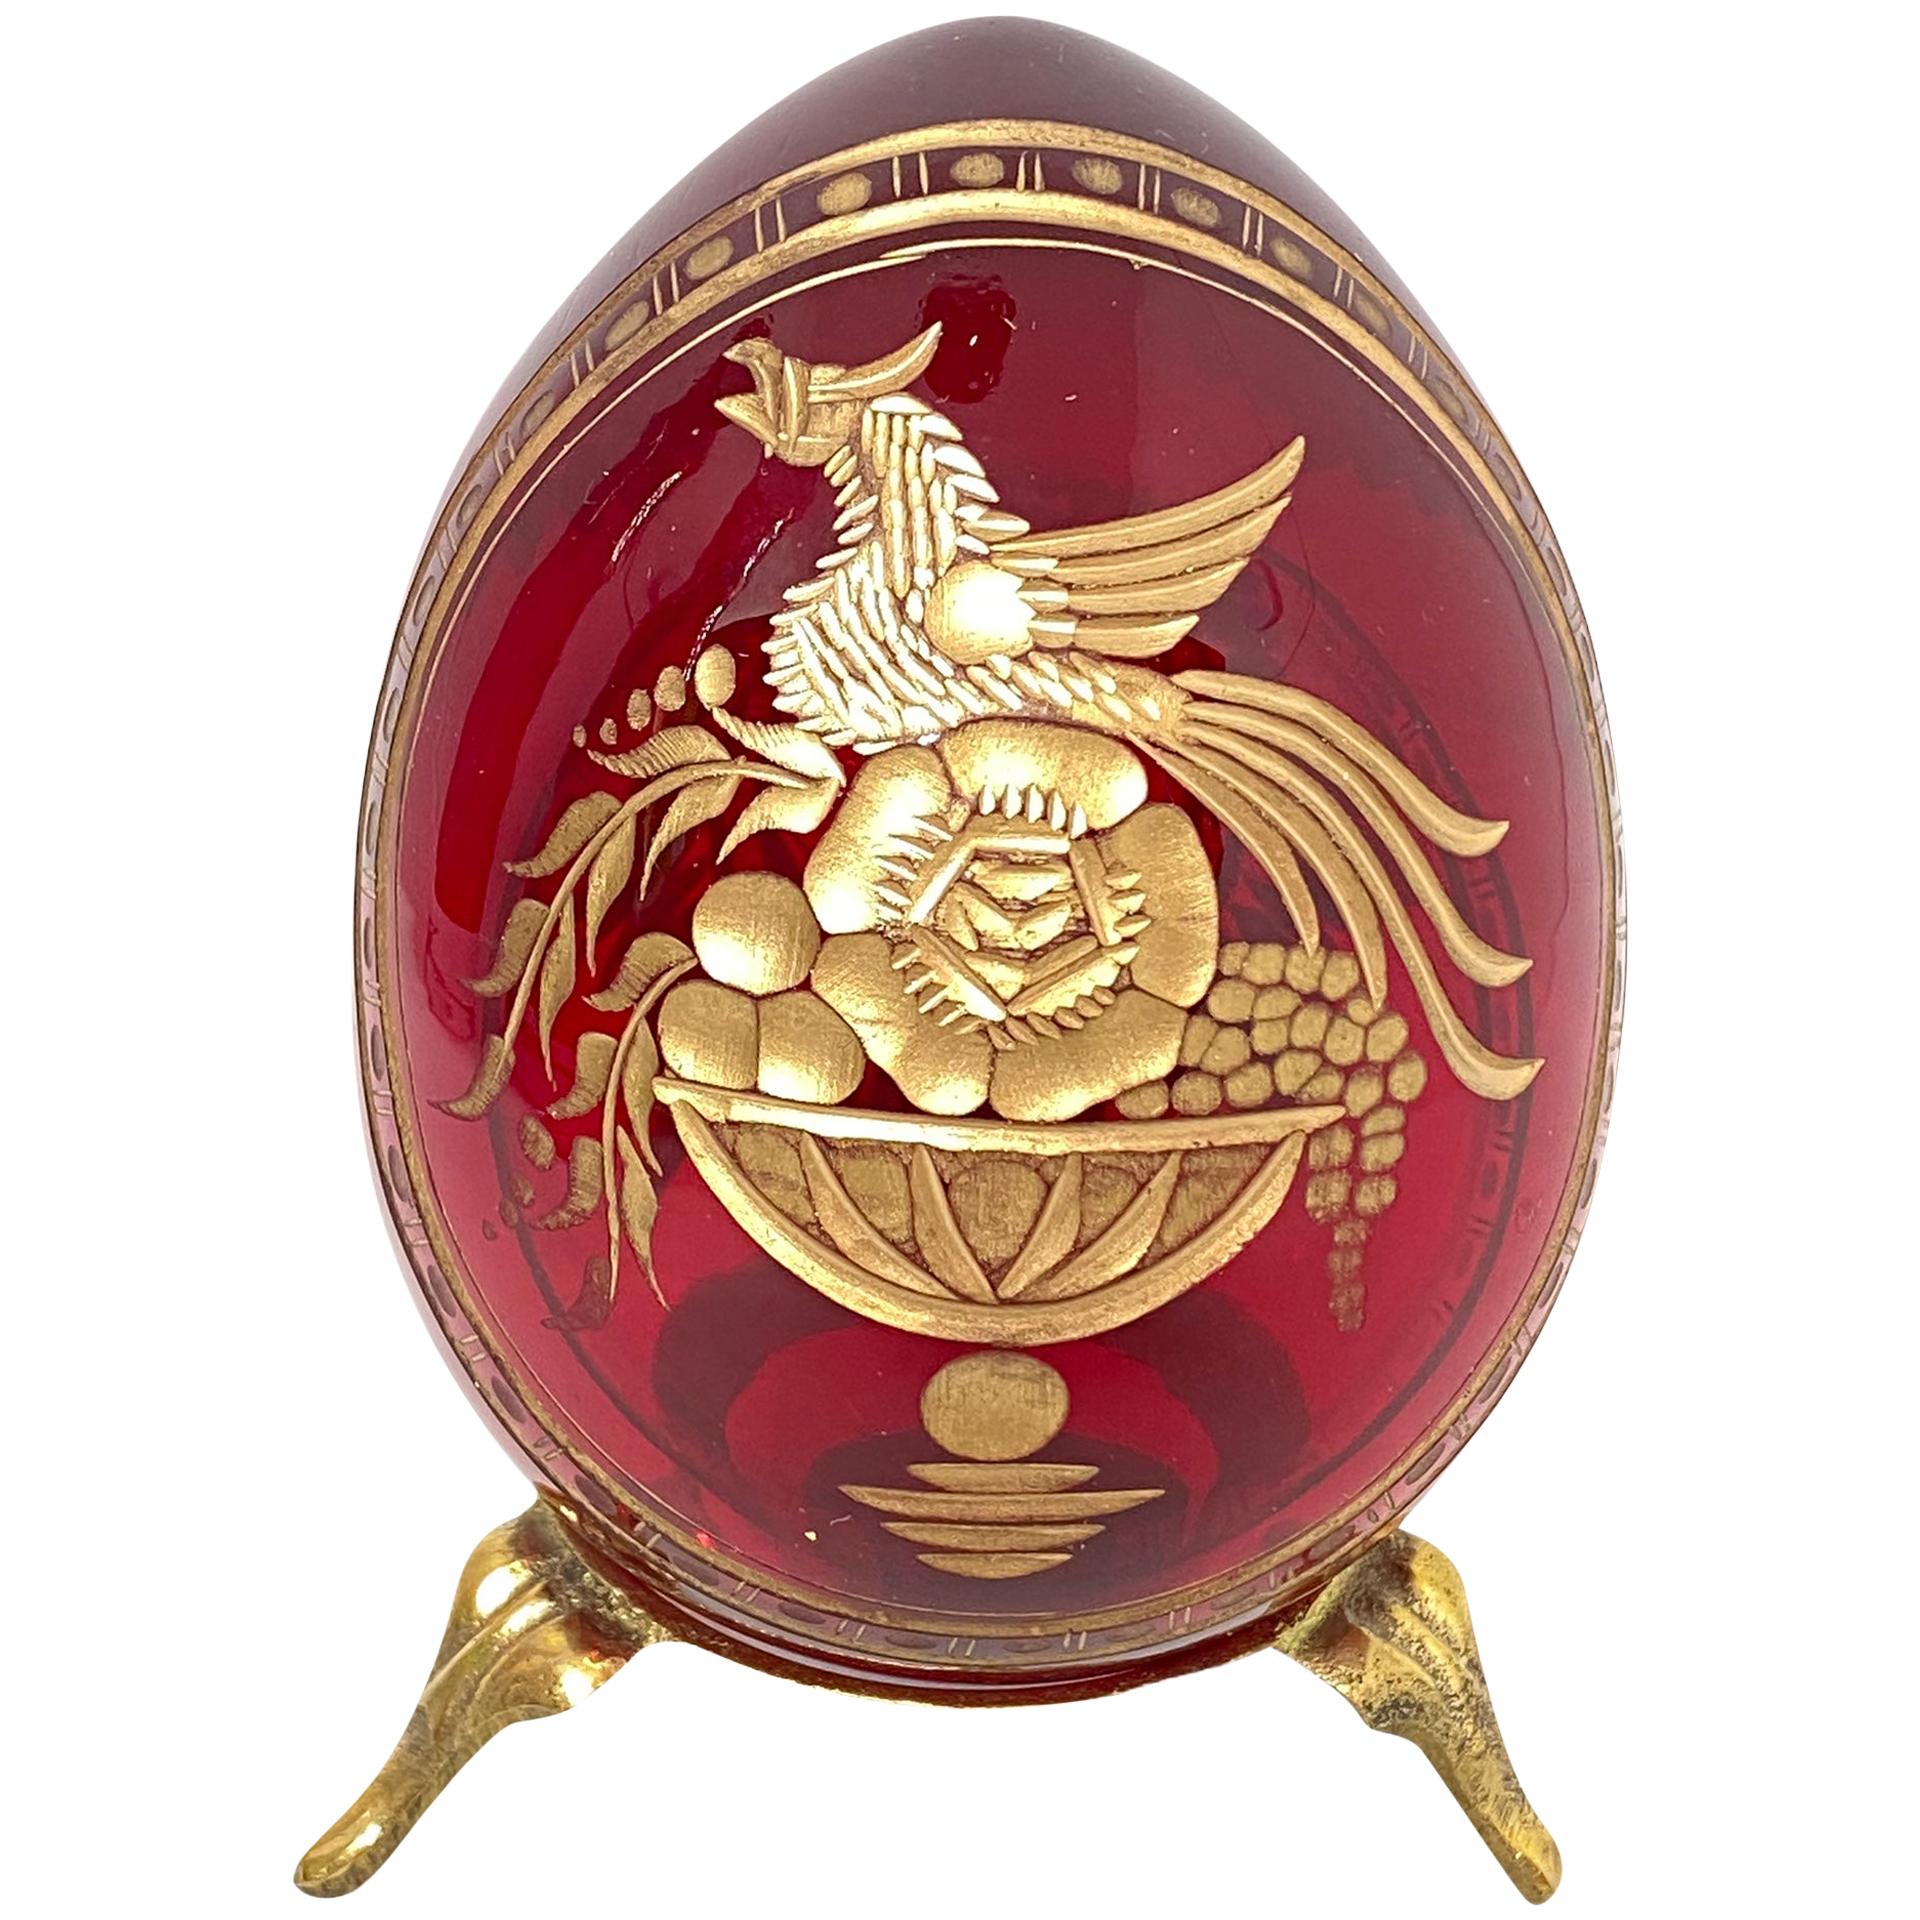 Vintage Faberge Russia style glass egg with etched royal garnishment. Reminiscent of eggs from St. Petersburg. Measures: 2.13